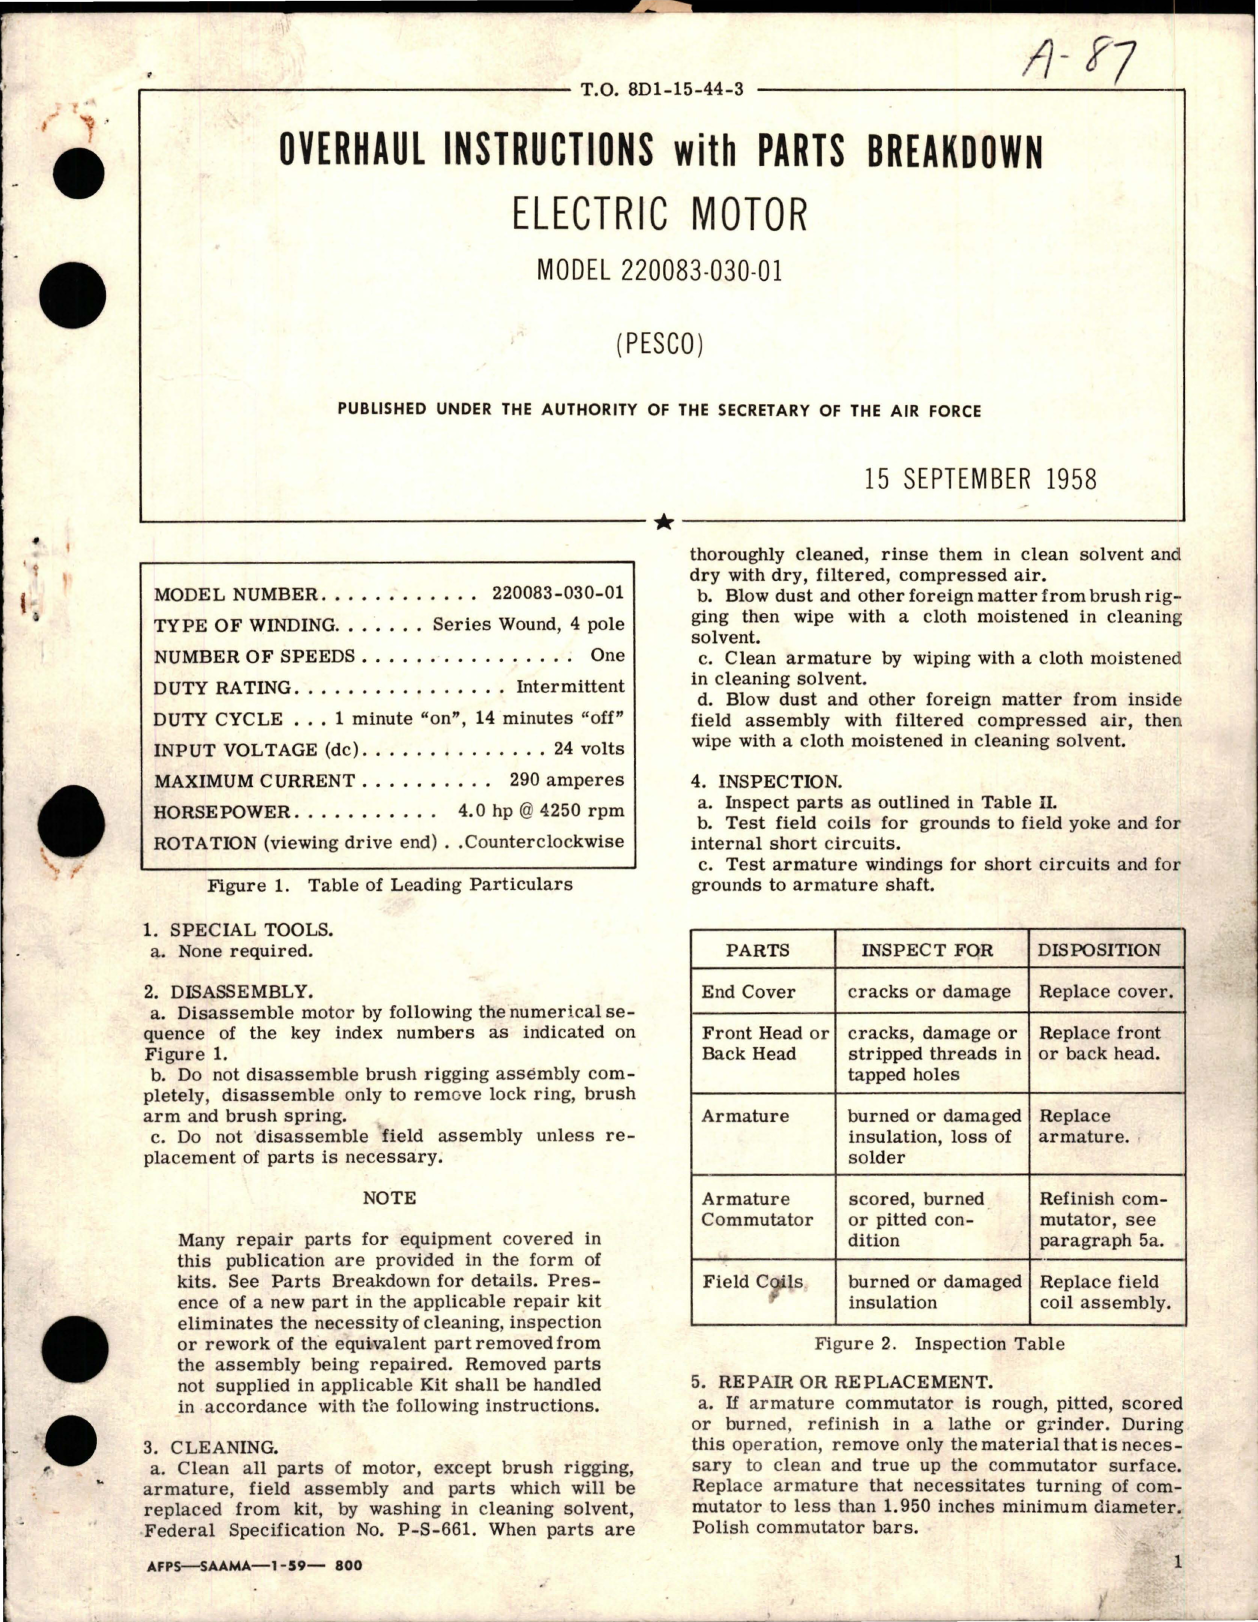 Sample page 1 from AirCorps Library document: Overhaul Instructions with Parts Breakdown for Electric Motor - Model 220083-030-01